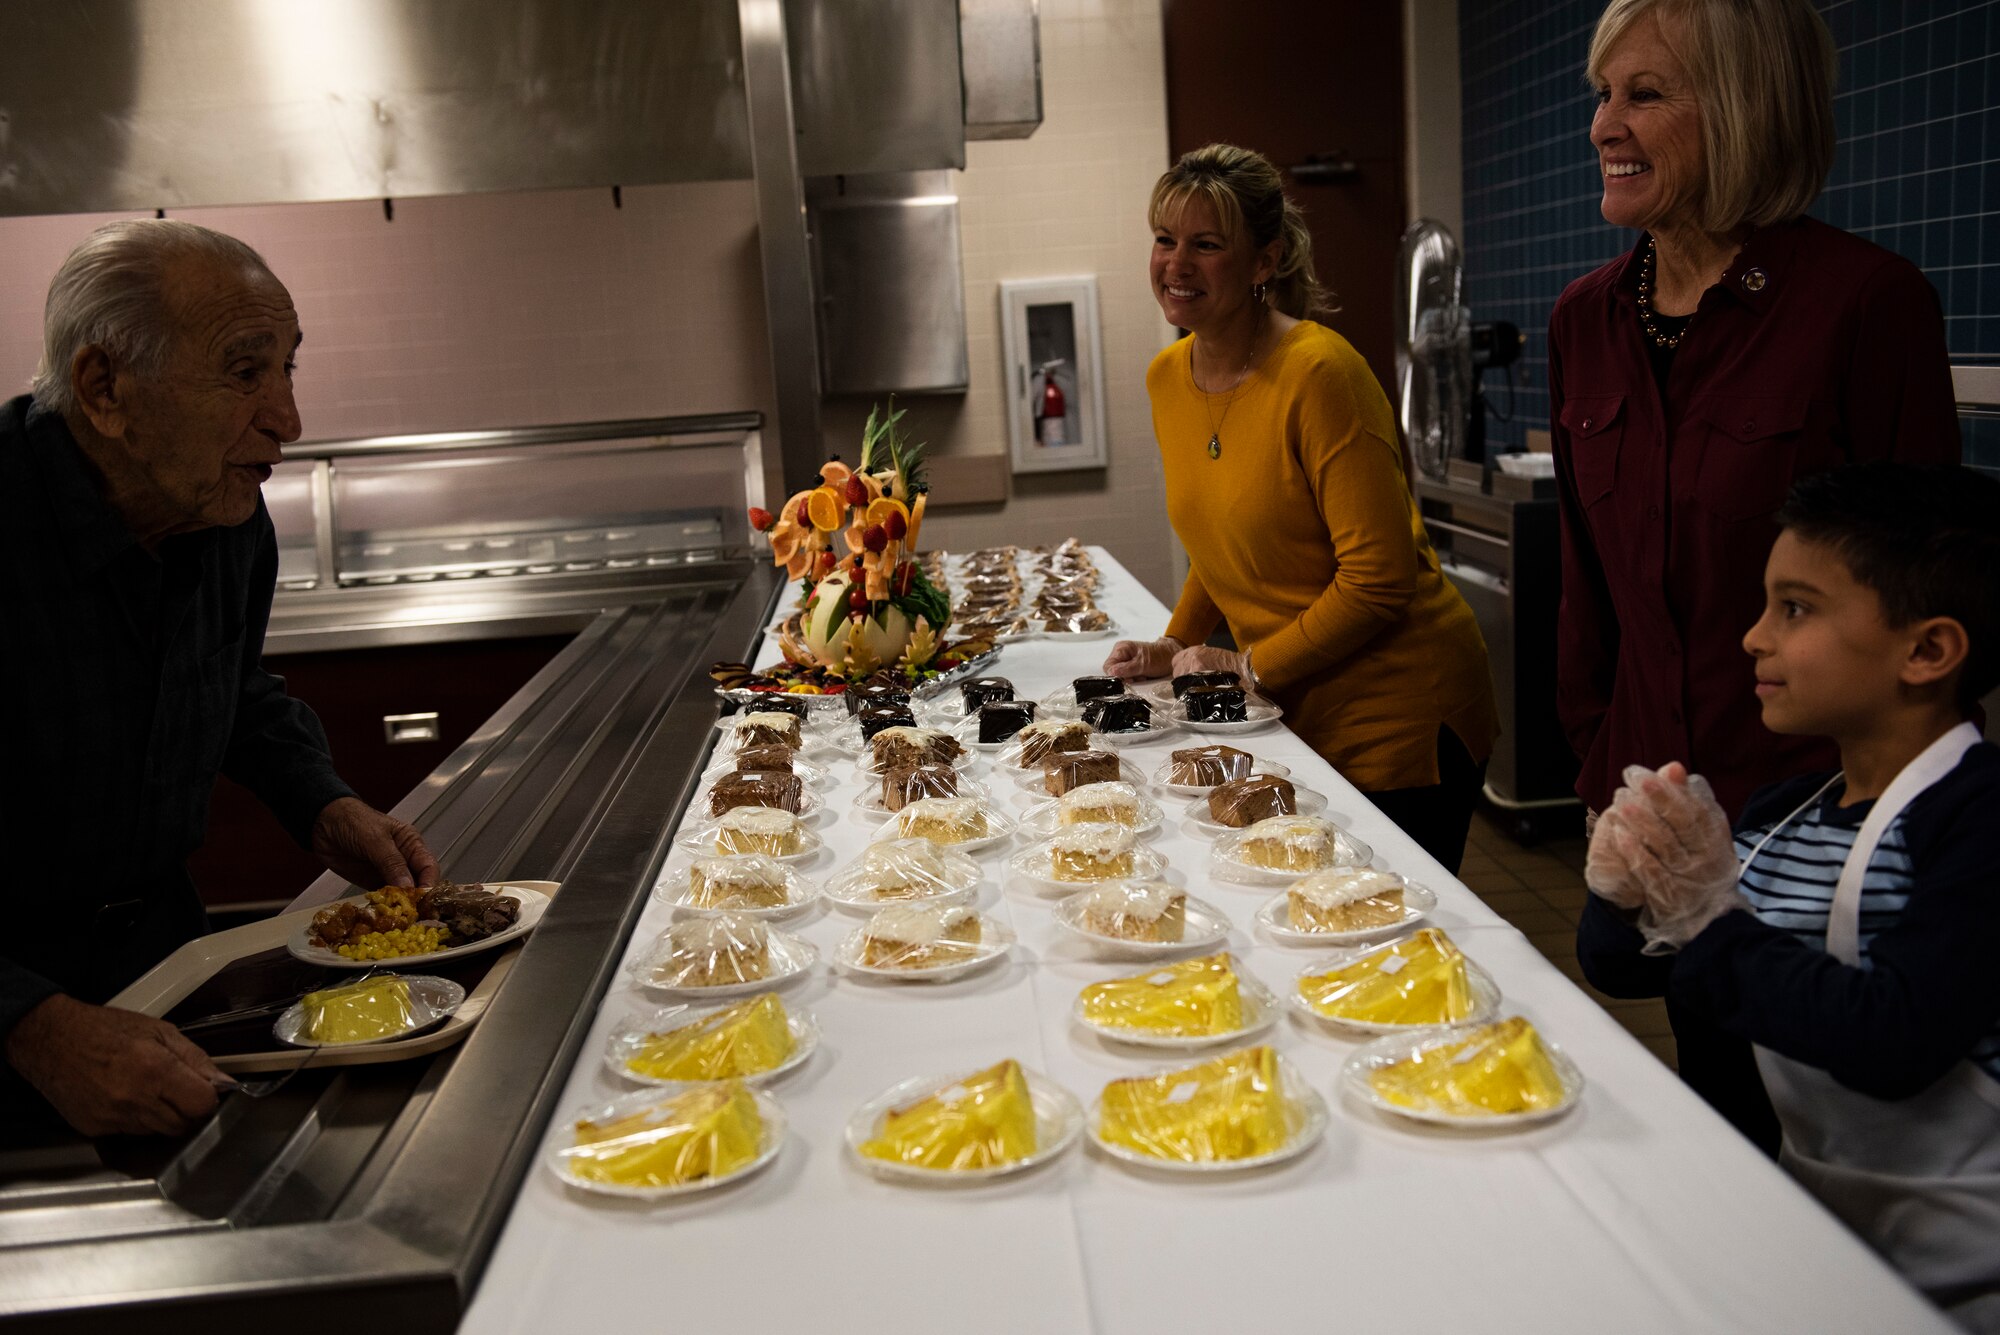 Retired U.S. Air Force Lt. Col. Daniel Daube, left, is served a dessert by Samantha Laidlaw, center, and Leah Dunn, right, at the 325th Force Support Squadron dining facility at Tyndall Air Force Base, Florida, Nov. 28, 2019. Attendees of the holiday meal celebration were served food by commanders, chiefs, first sergeants, and special guests of the 325th Fighter Wing. (U.S. Air Force photo by Staff Sgt. Magen M. Reeves)